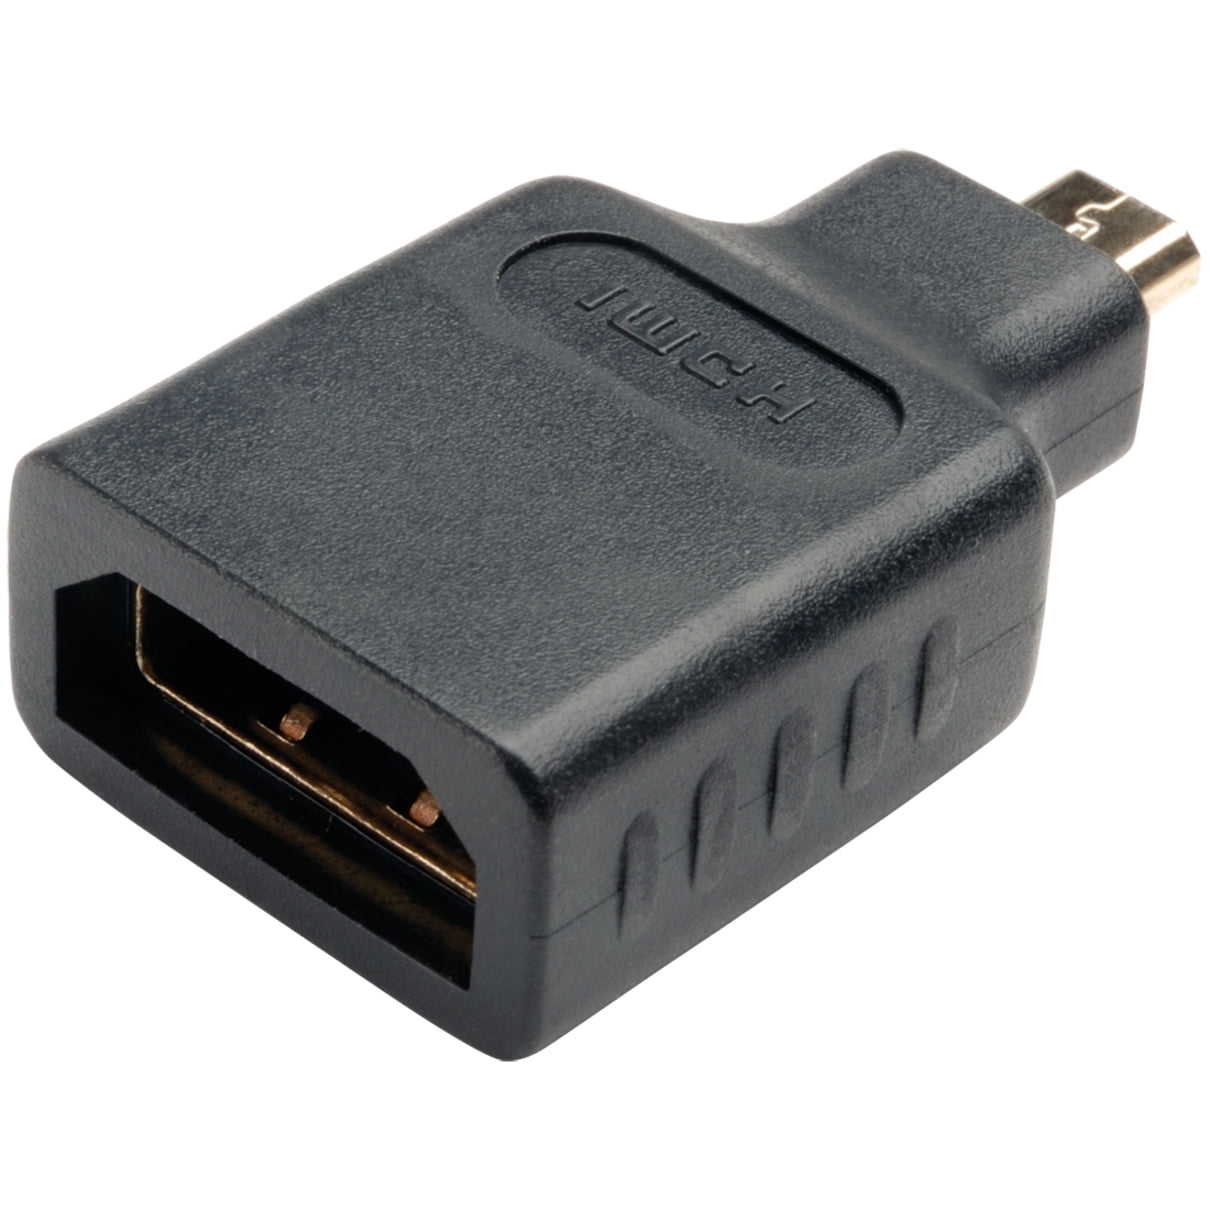 Tripp Lite P142-000-MICRO HDMI Female to Micro HDMI Male Adapter, Gold-Plated Connector, 1920 x 1080 Resolution Supported, Black